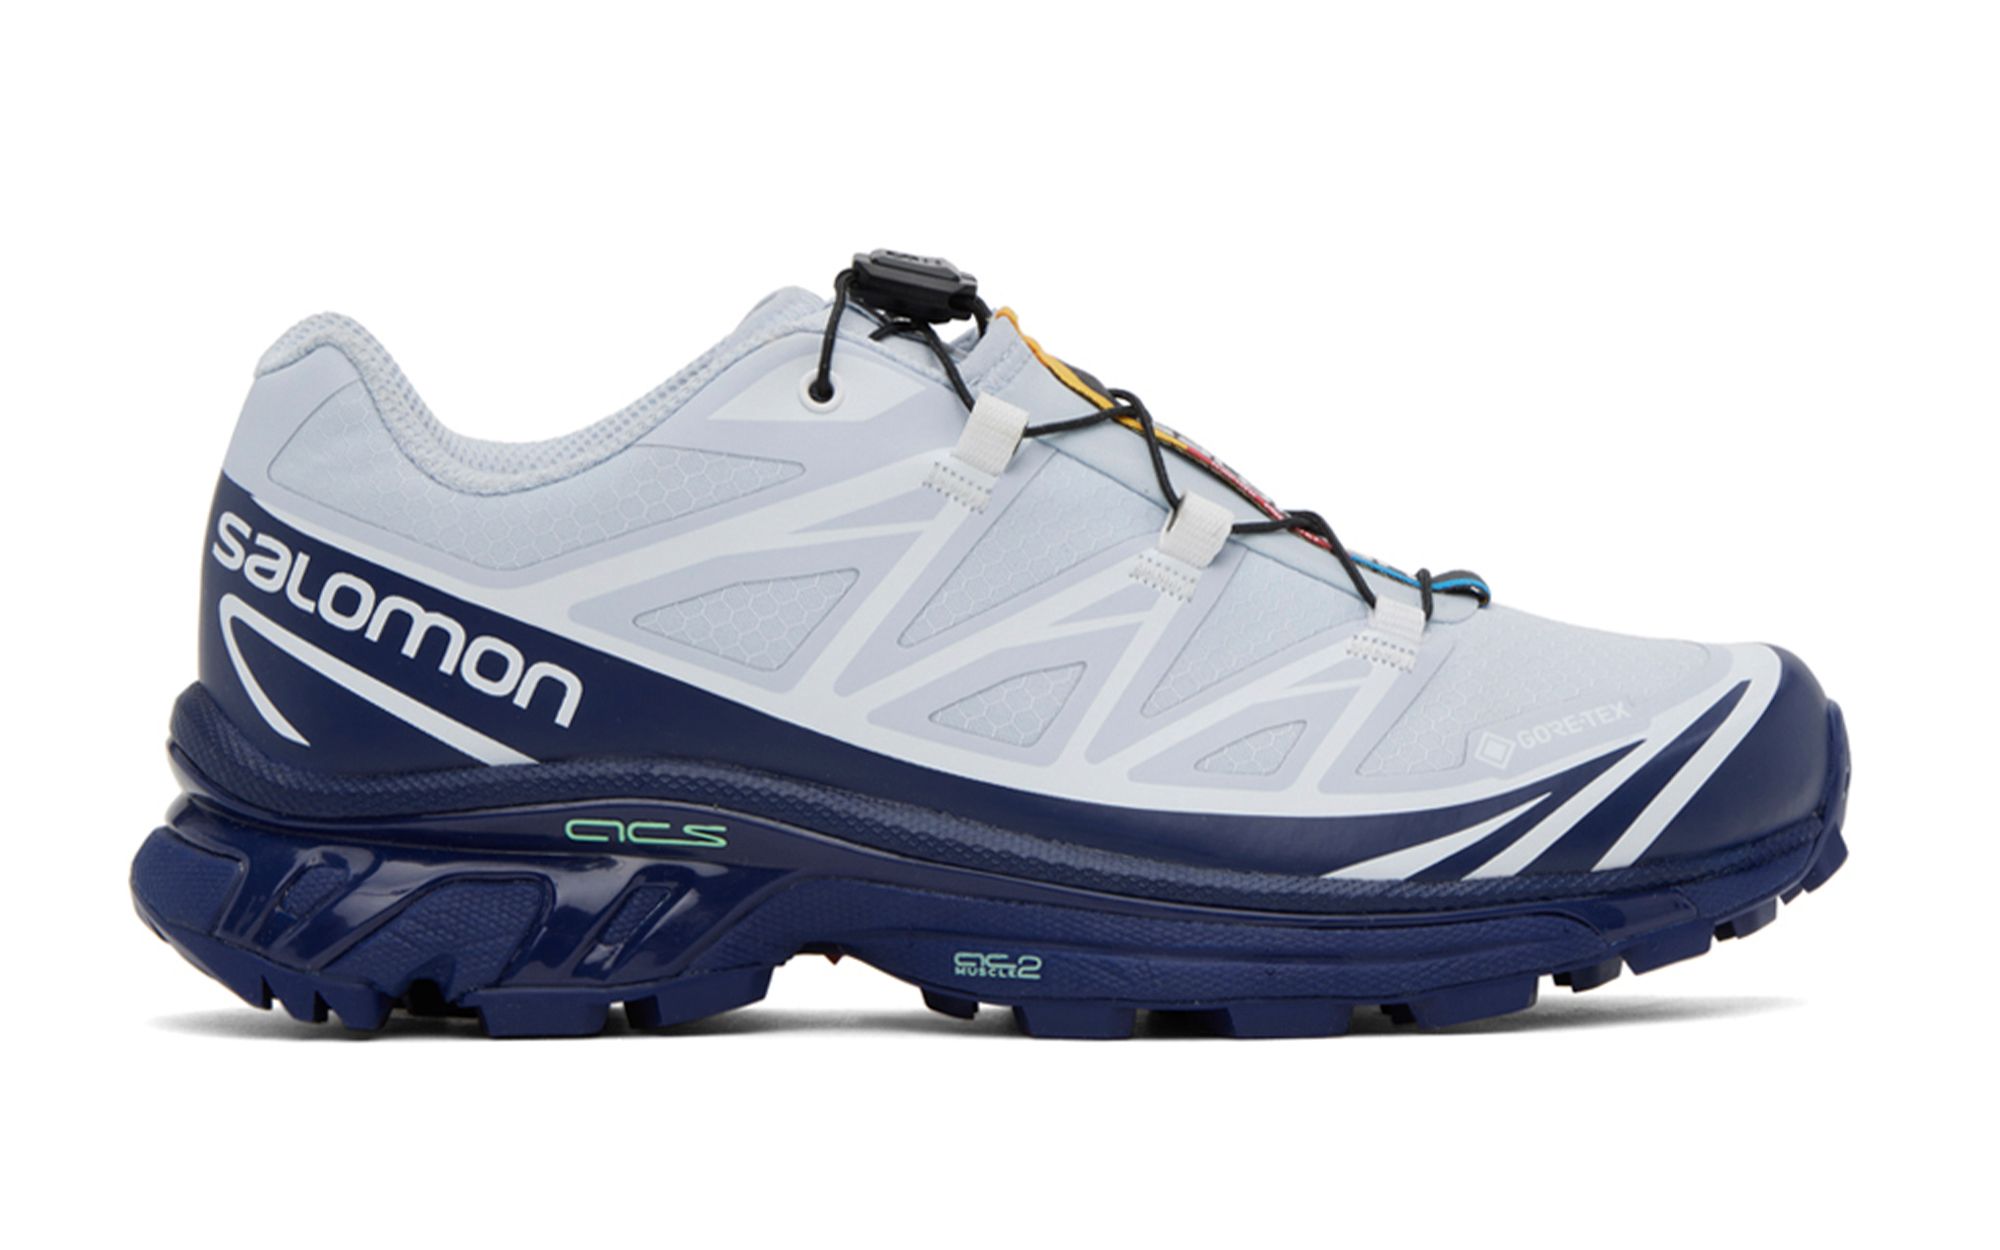 The Salomon XT-6 GORE-TEX is Available Now in Beige and Black ...